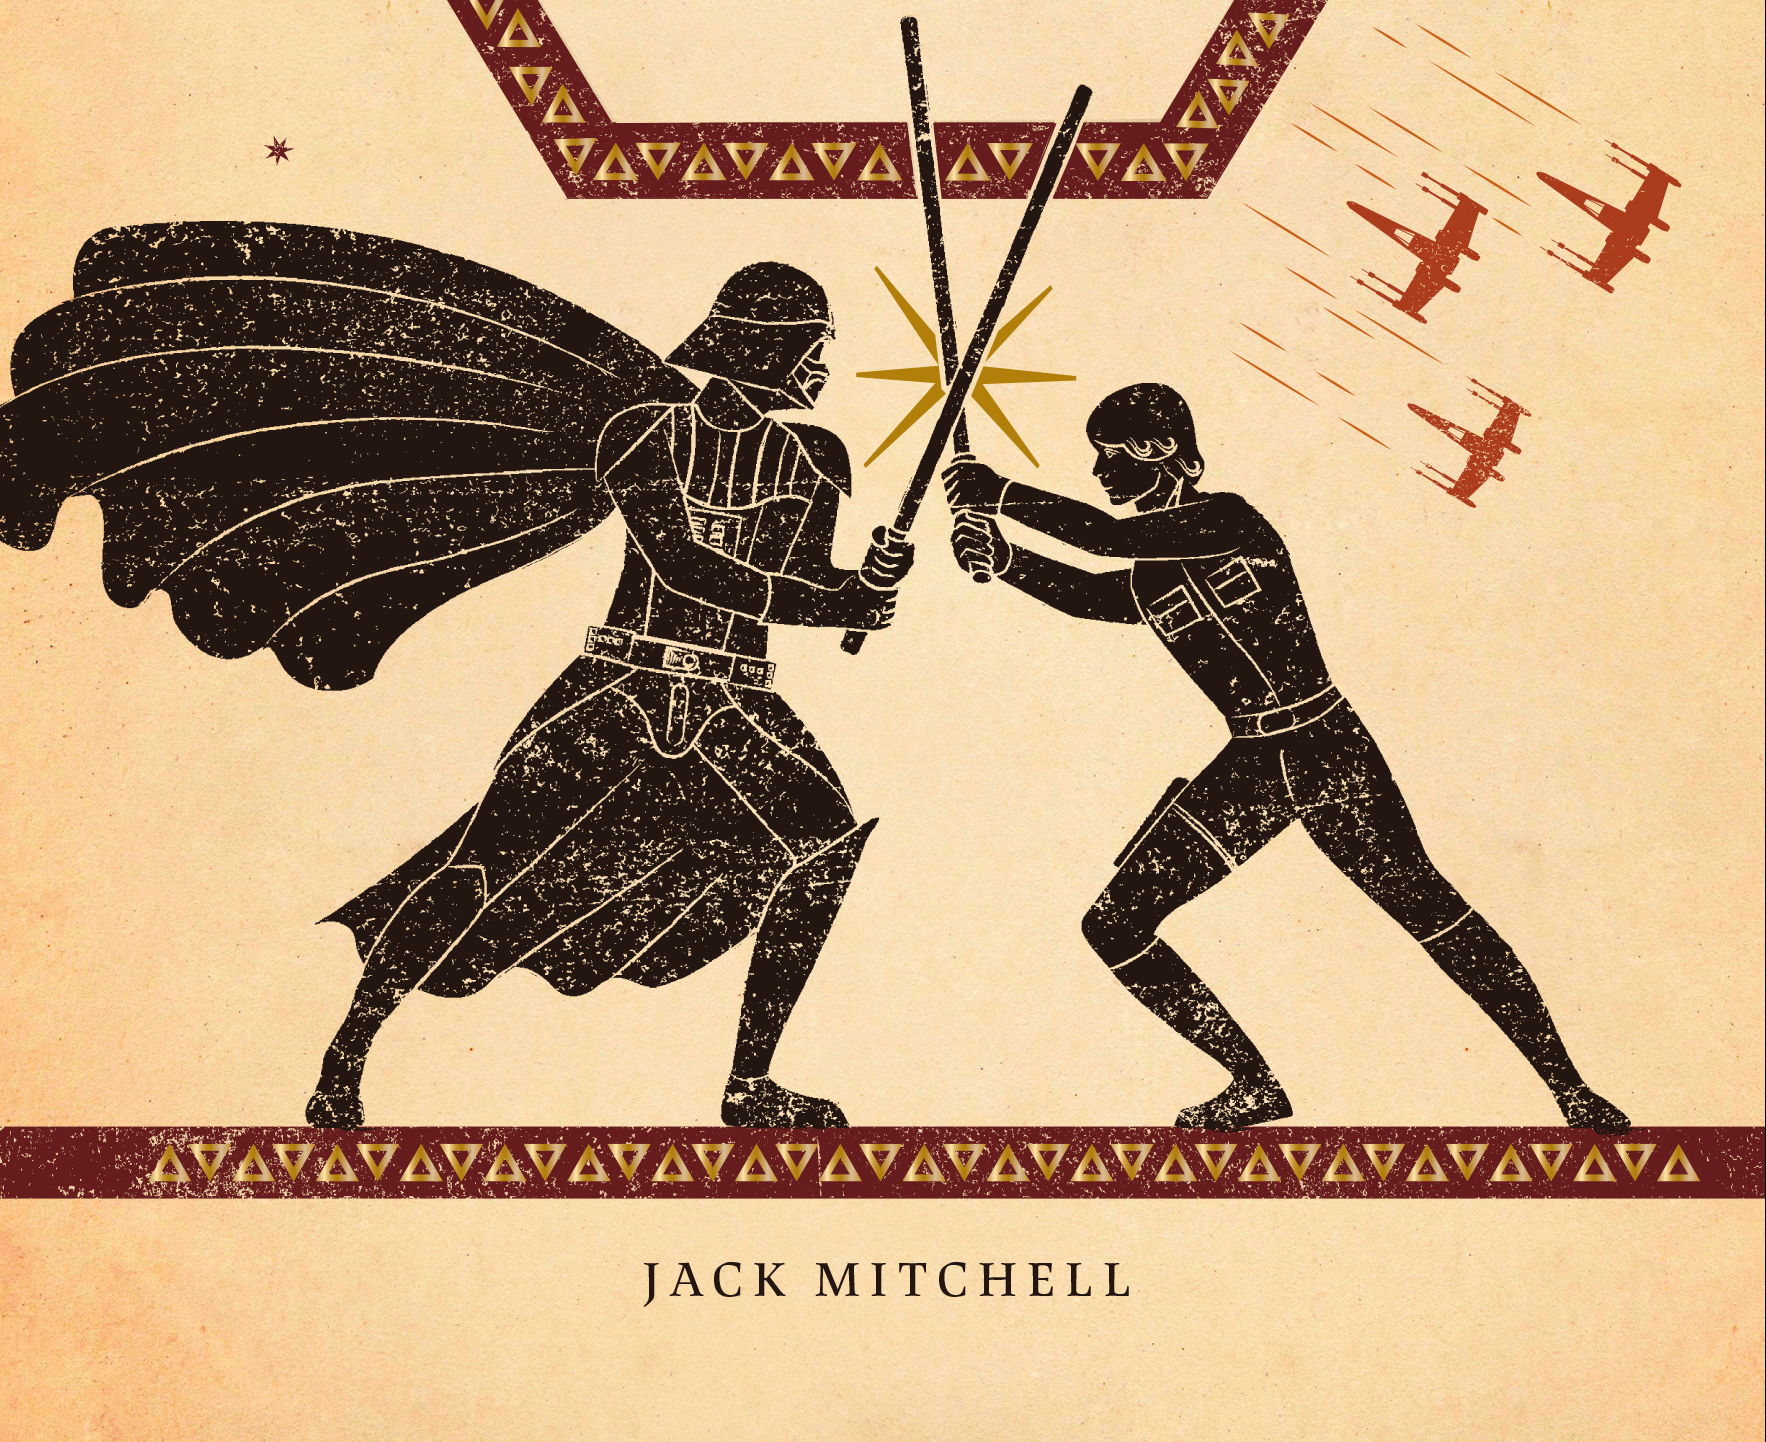 From Hollywood to Homer: Star Wars as epic poetry 